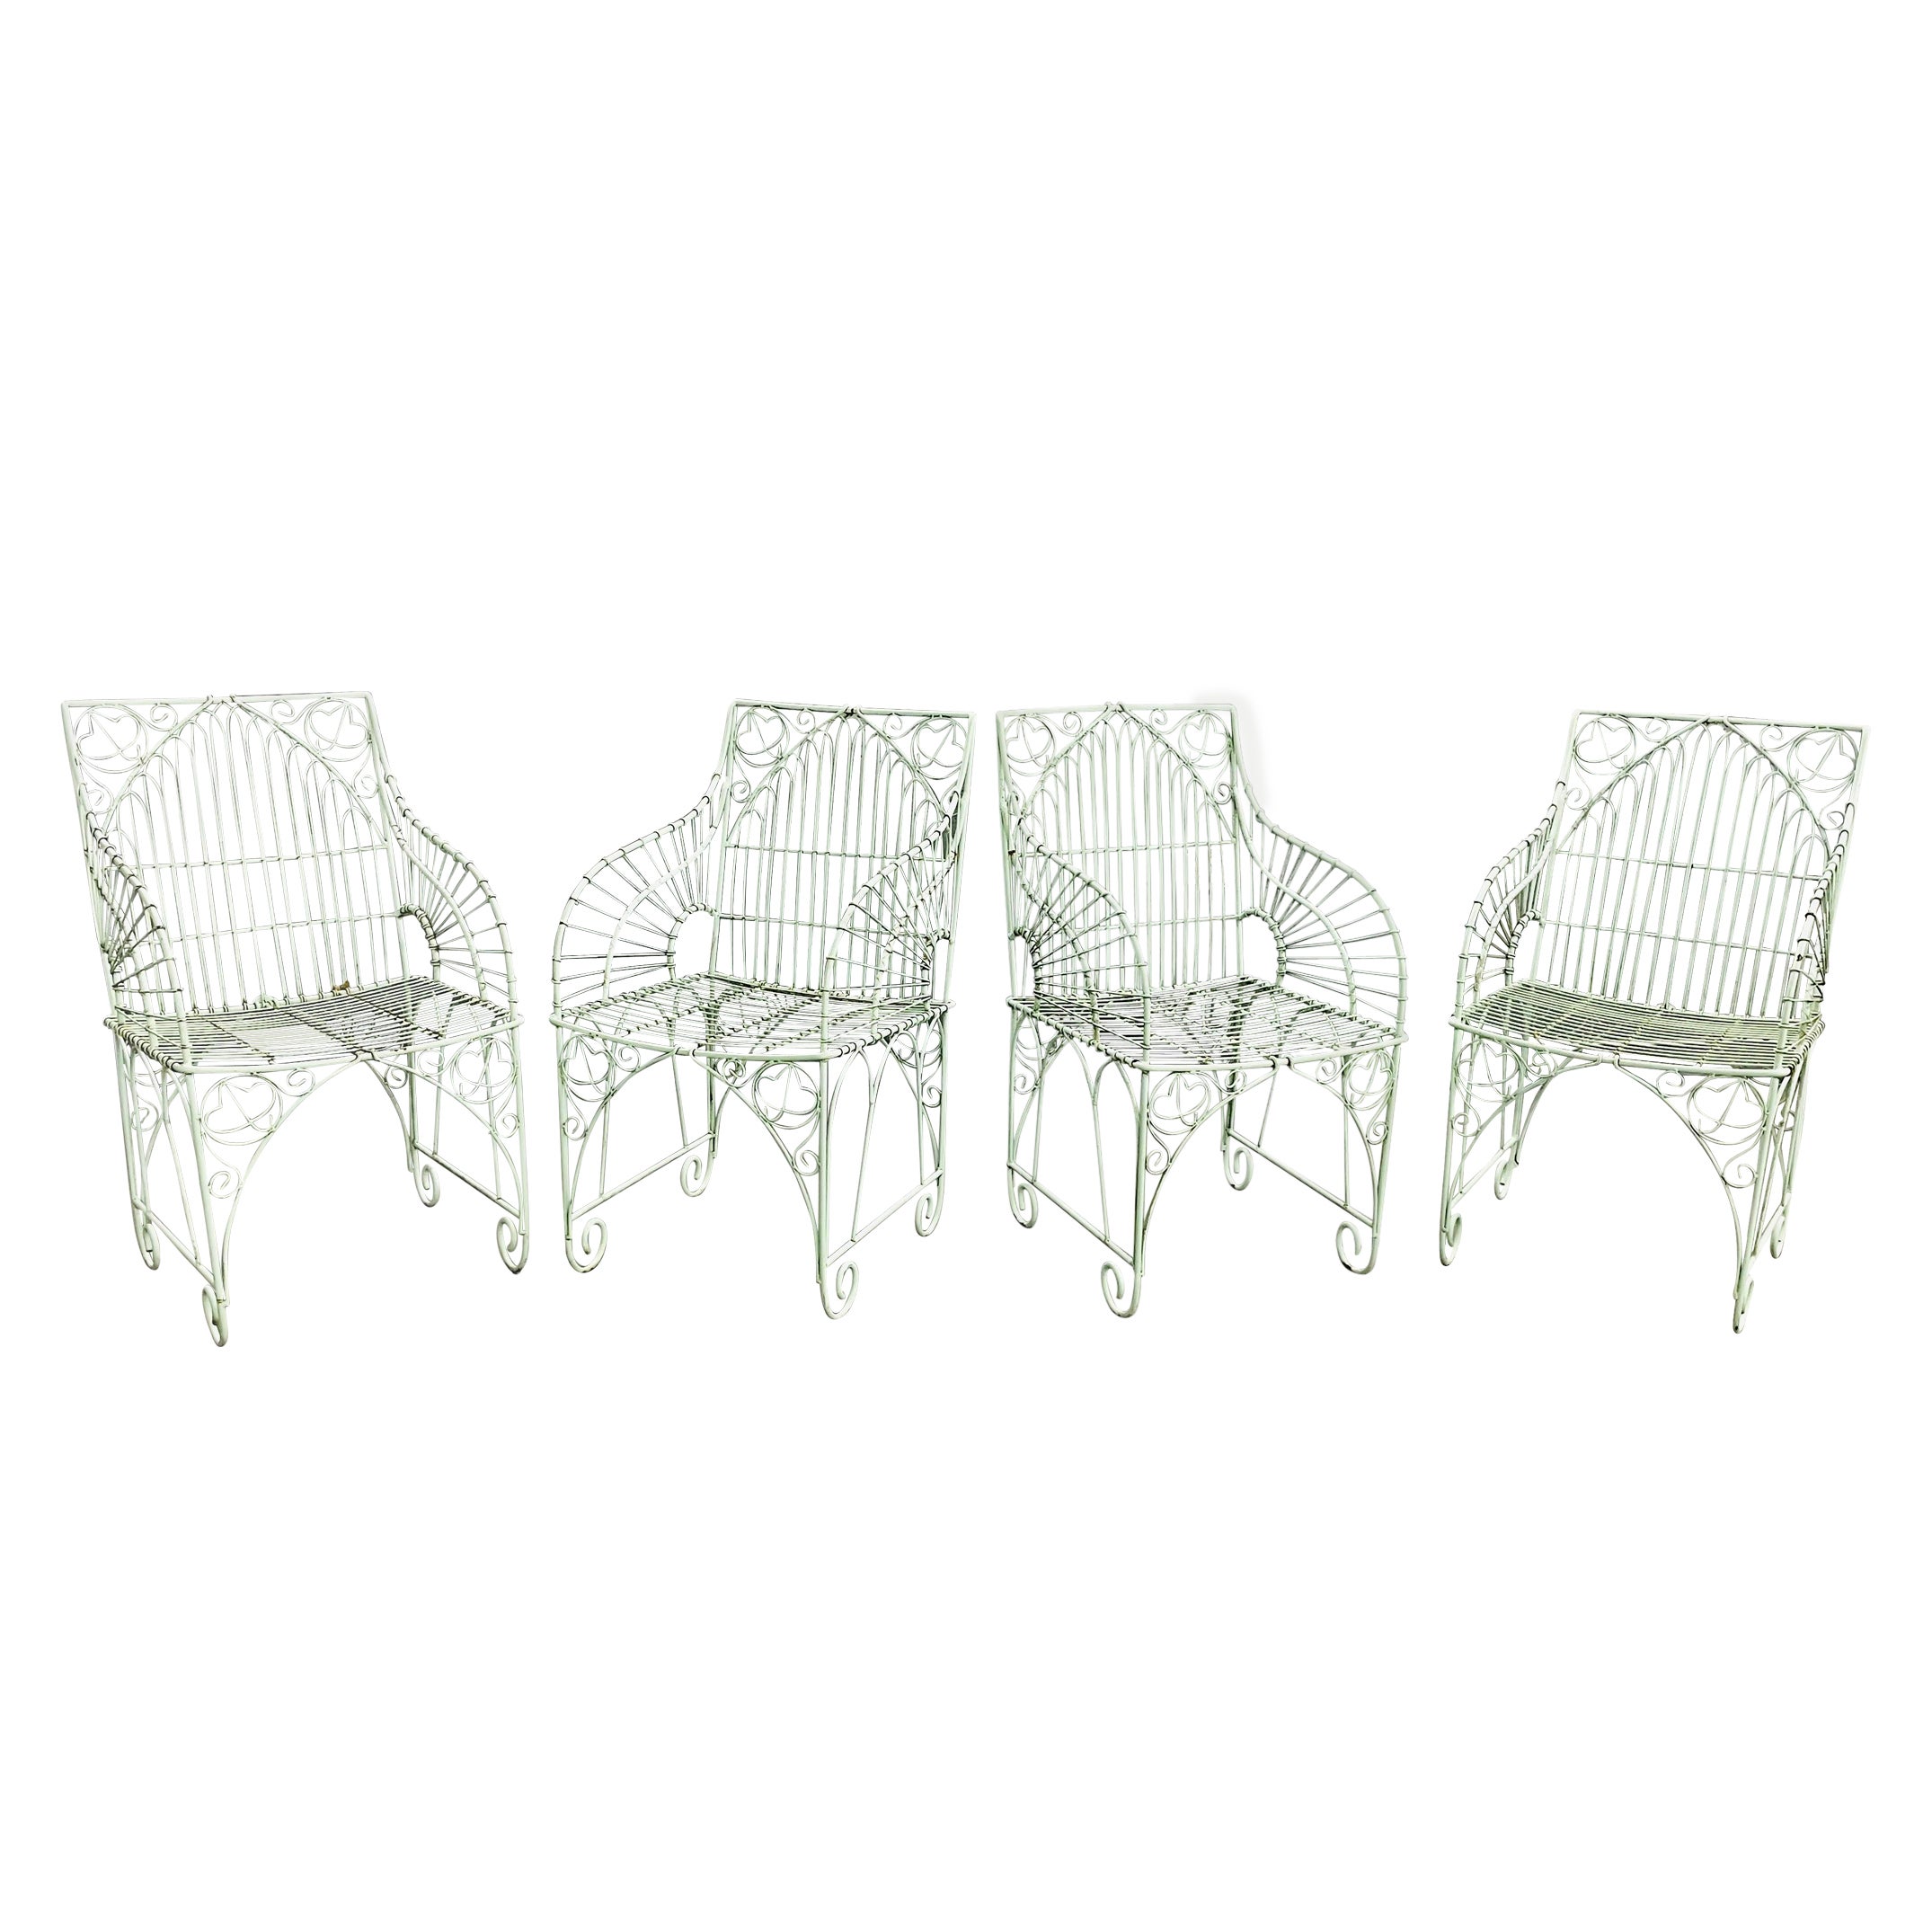 Vintage Wrought Iron Outdoor Chairs